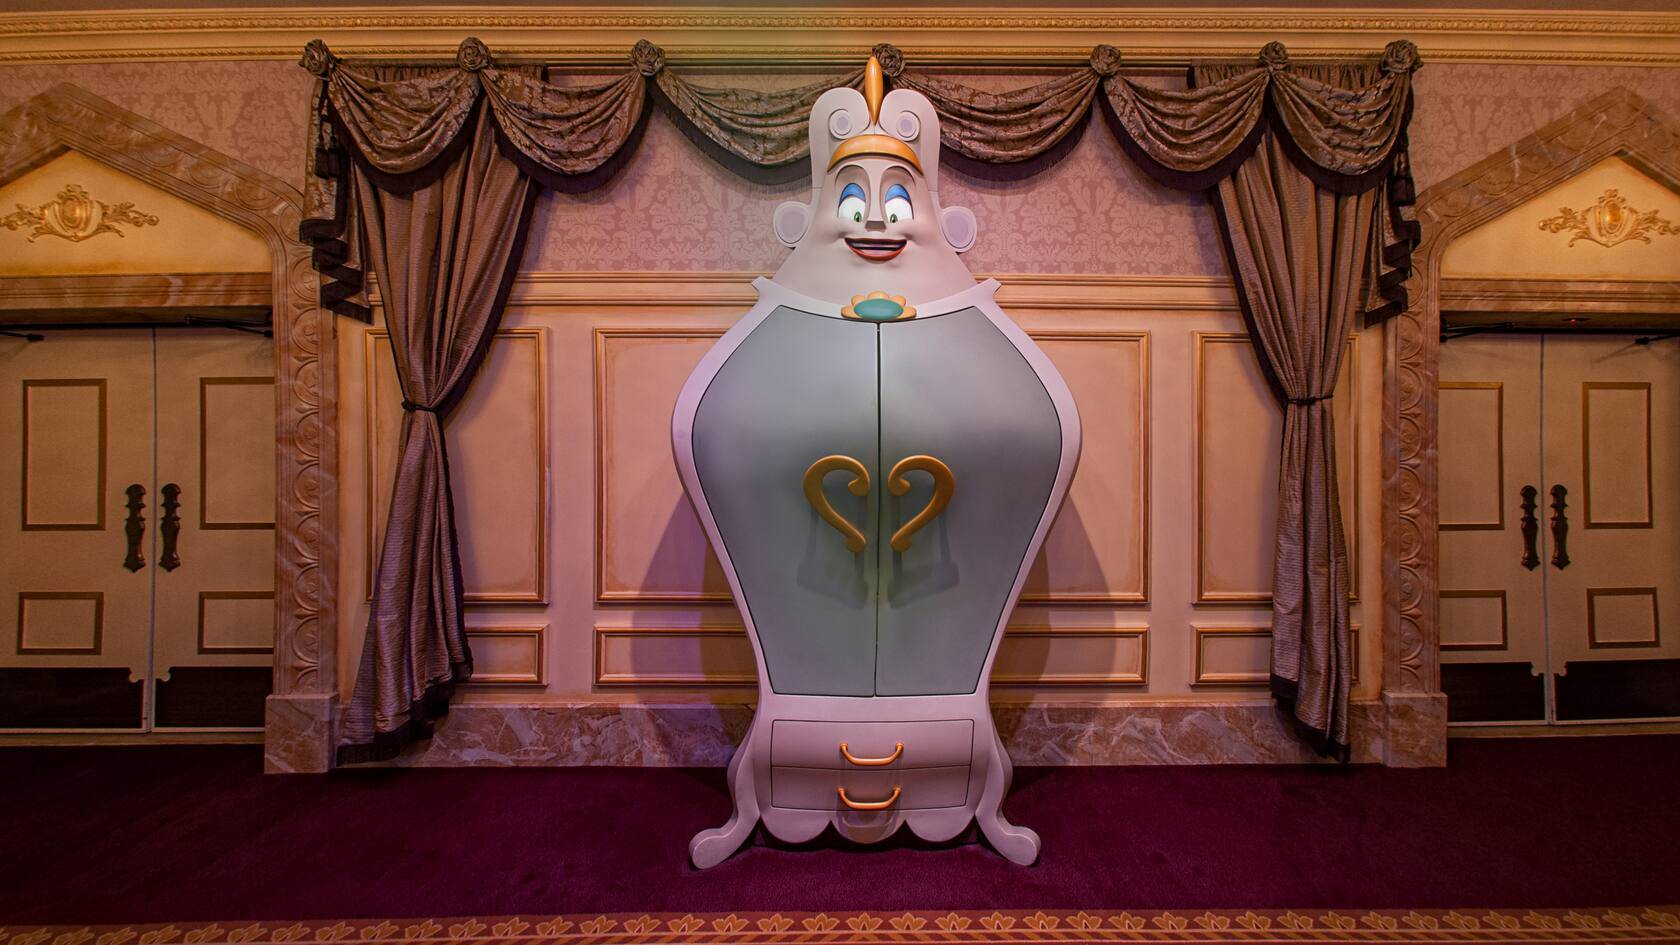 Two more Magic Kingdom meet-and-greet attractions will reopen soon at Walt Disney World